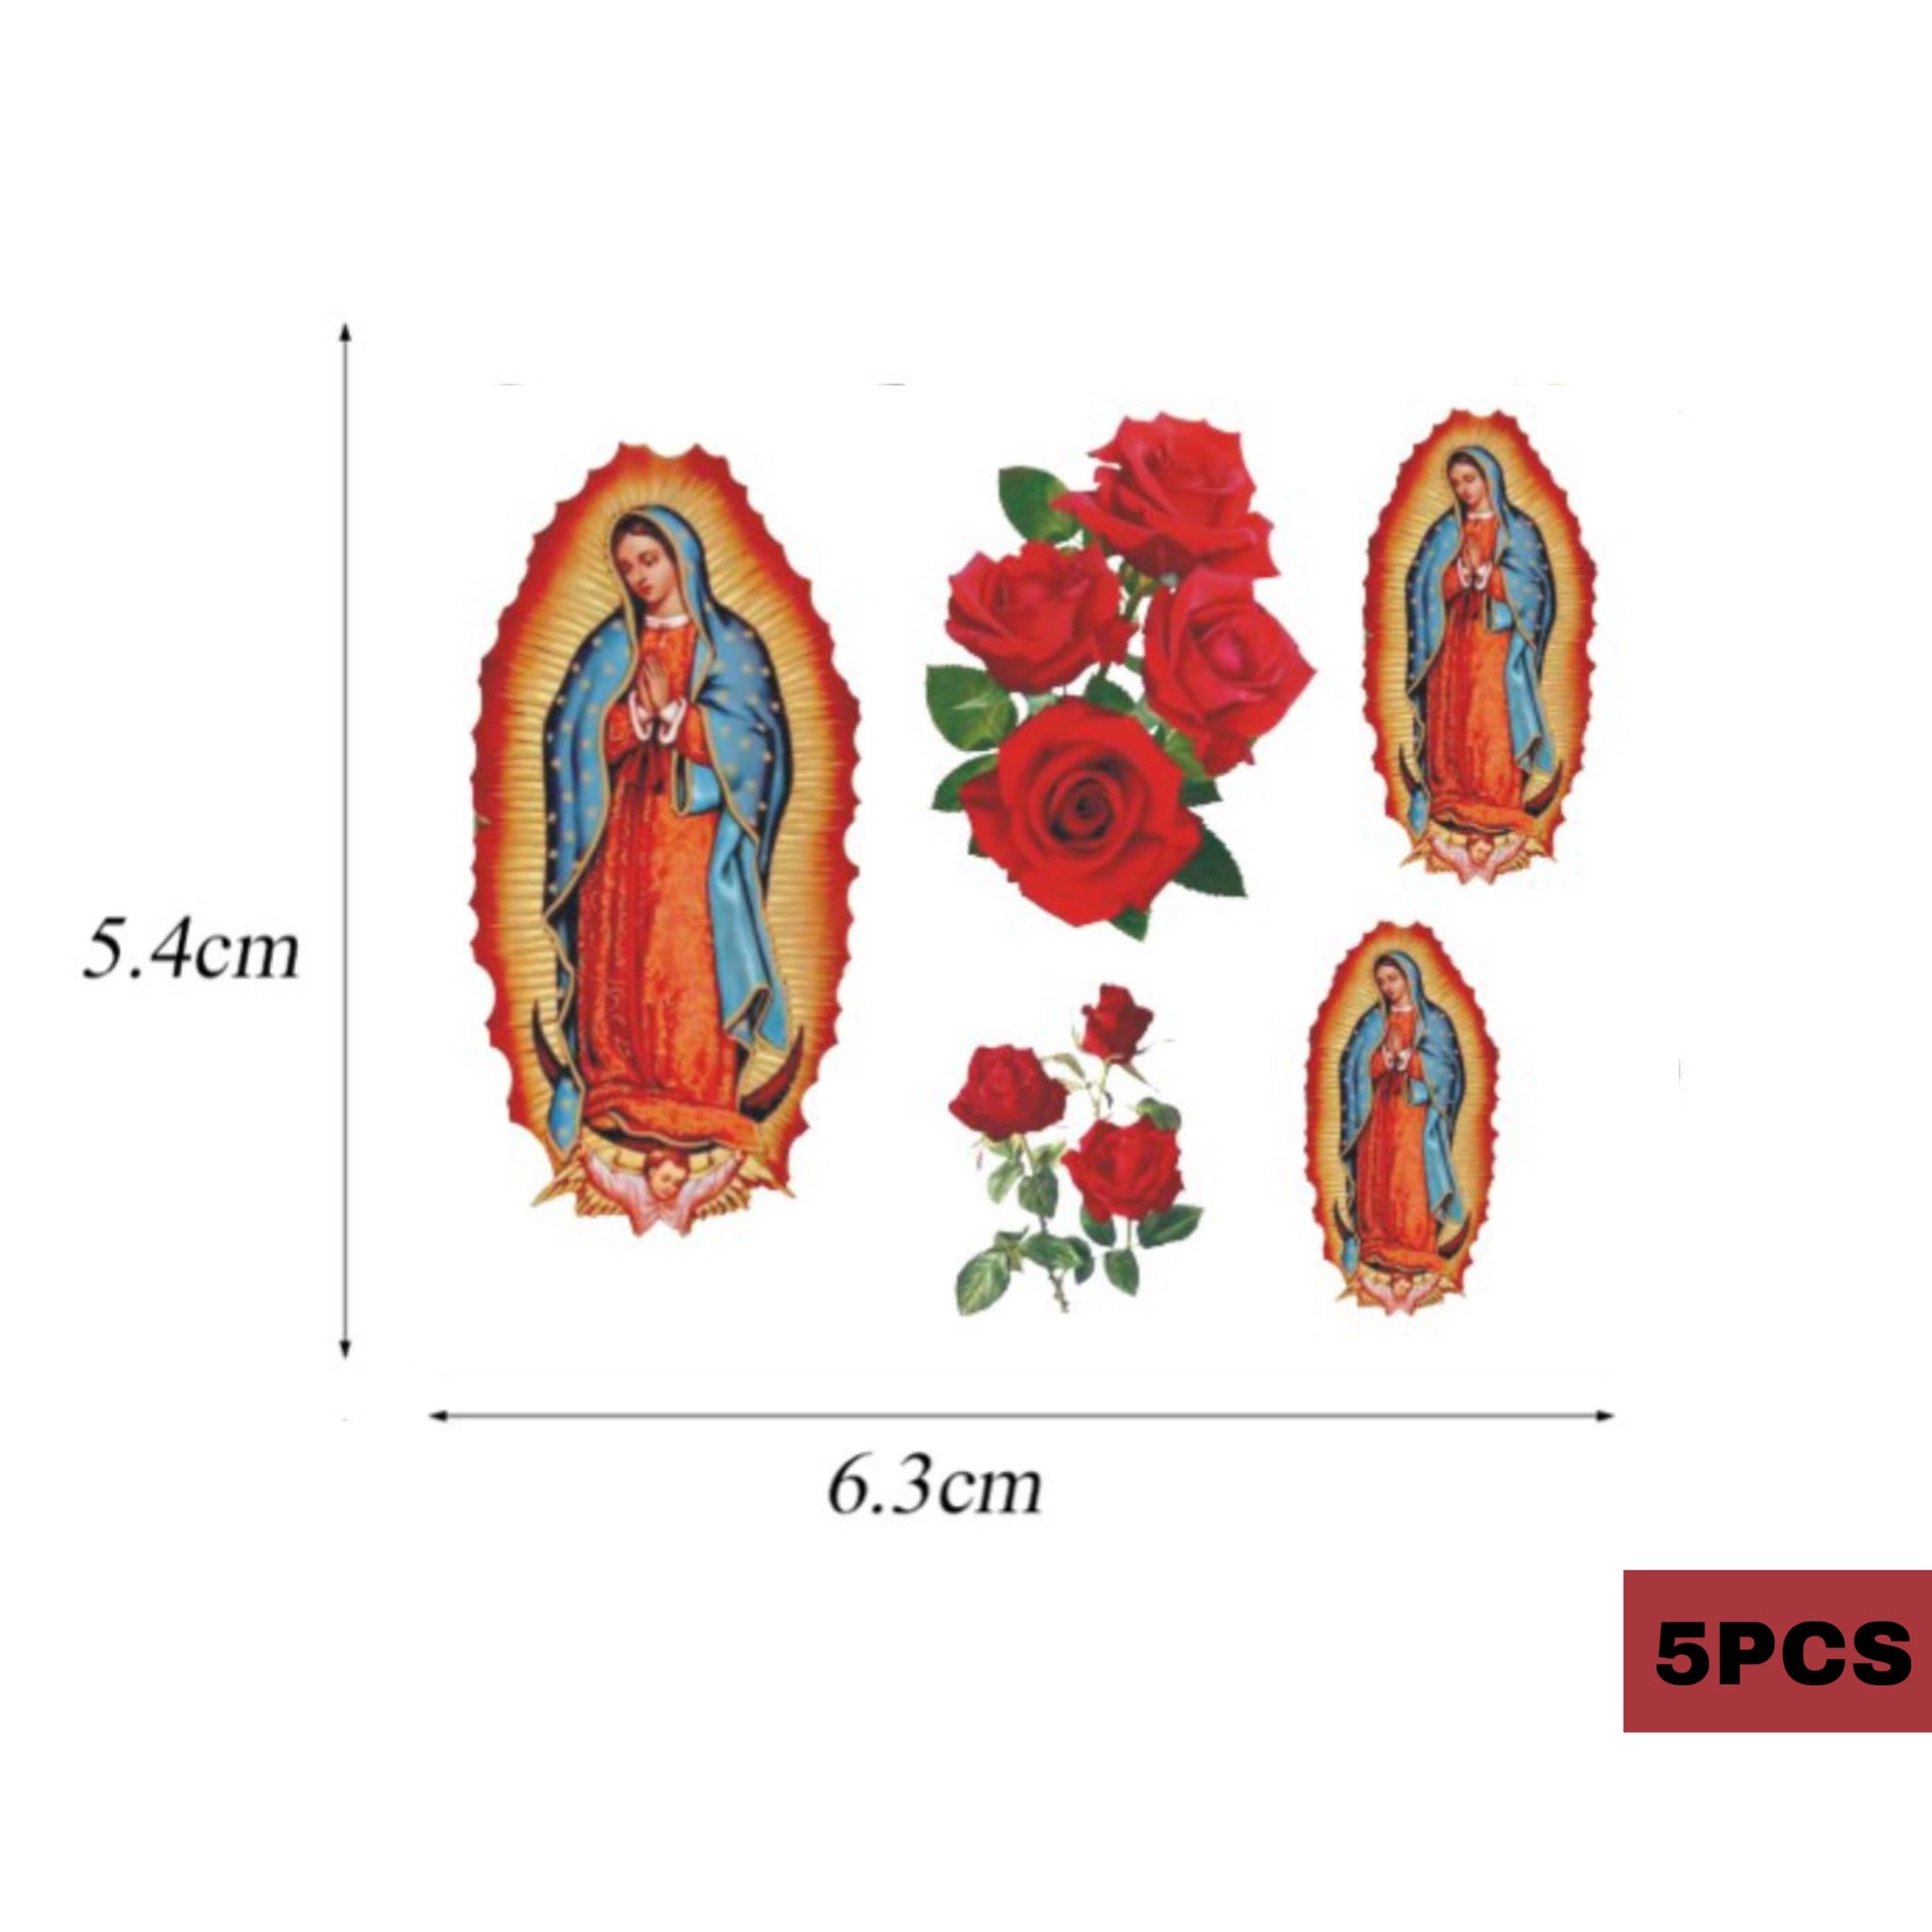 5 pcs Mary Water Decals